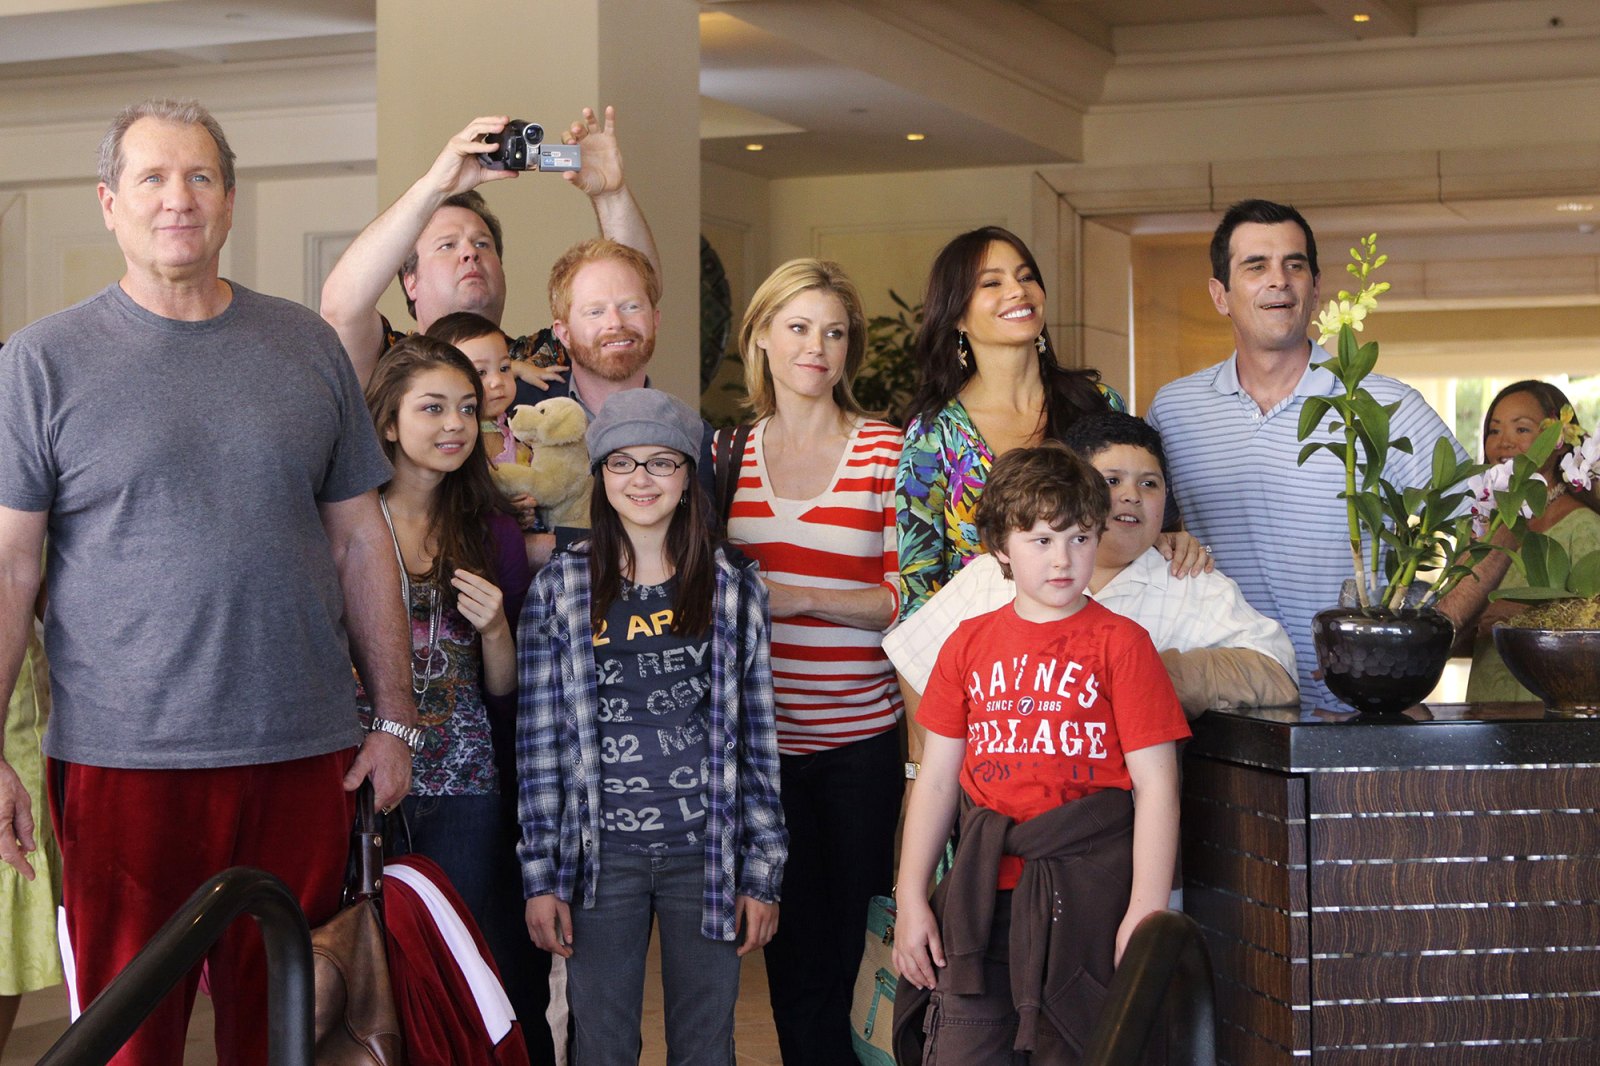 Modern Family Which TV Shows Have the Most Emmys Wins